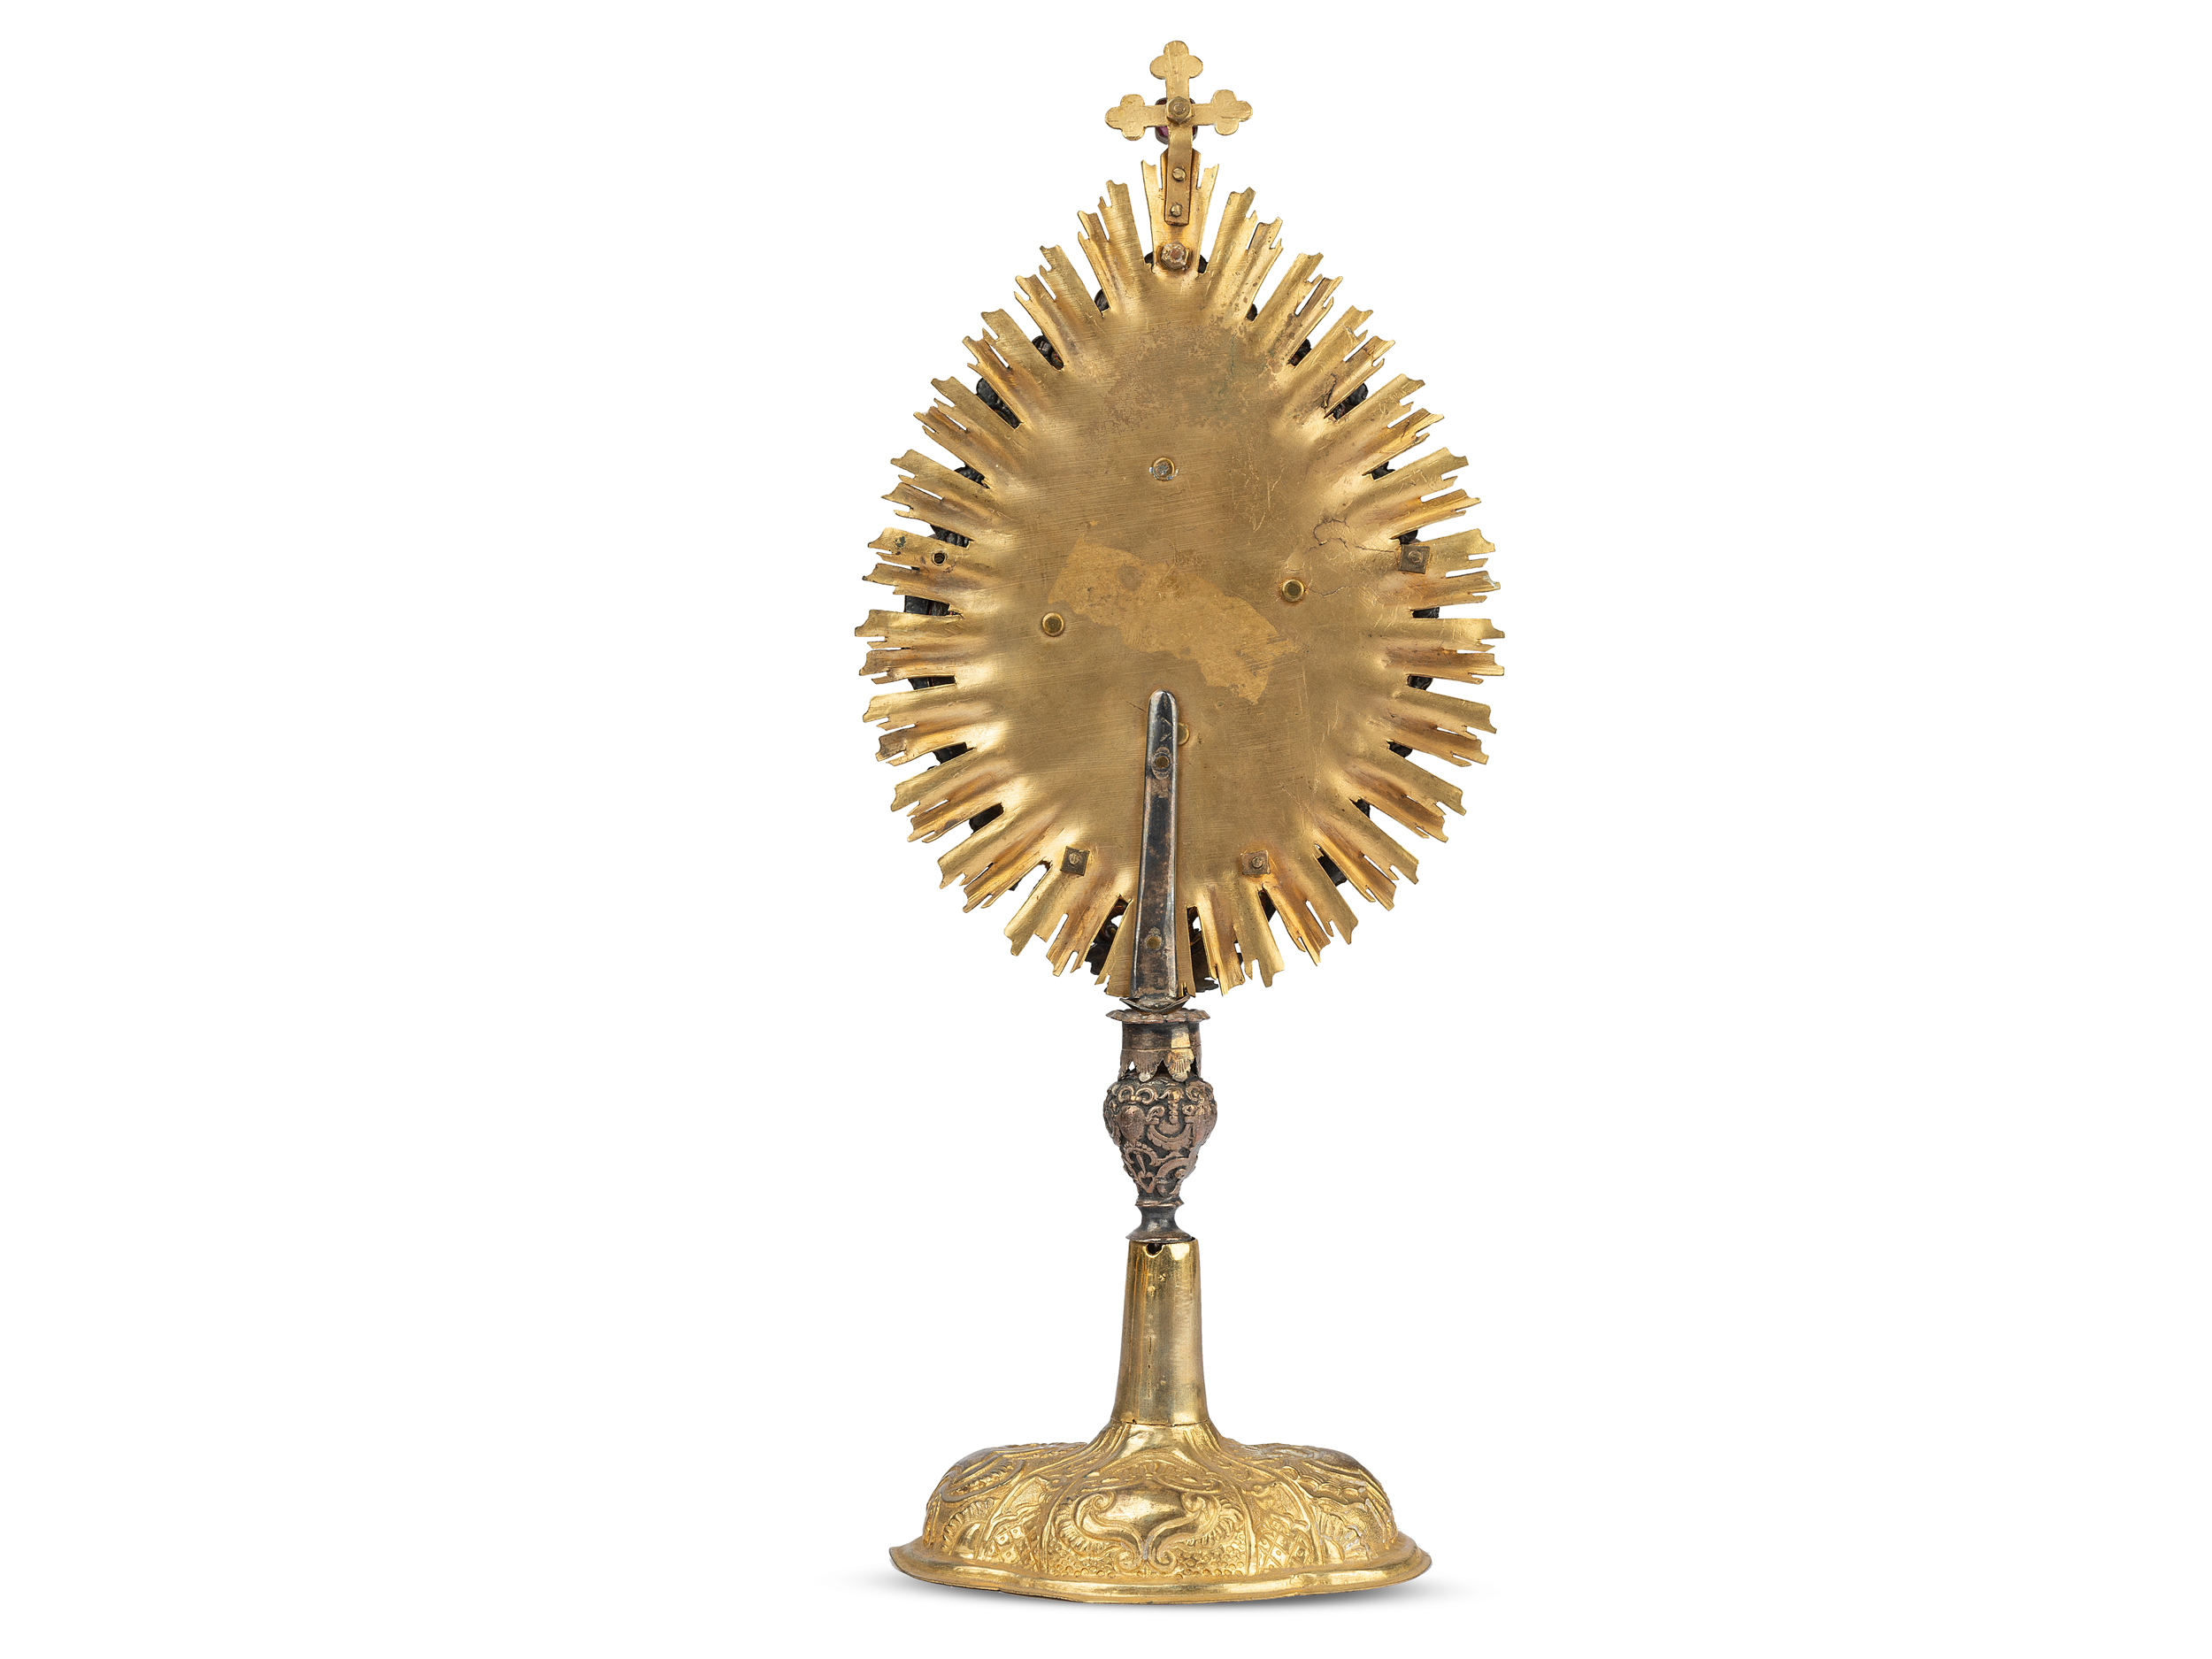 Reliquary monstrance, St. Rupert and St. Virgil, Brass gold-plated, with silver applications - Image 2 of 3